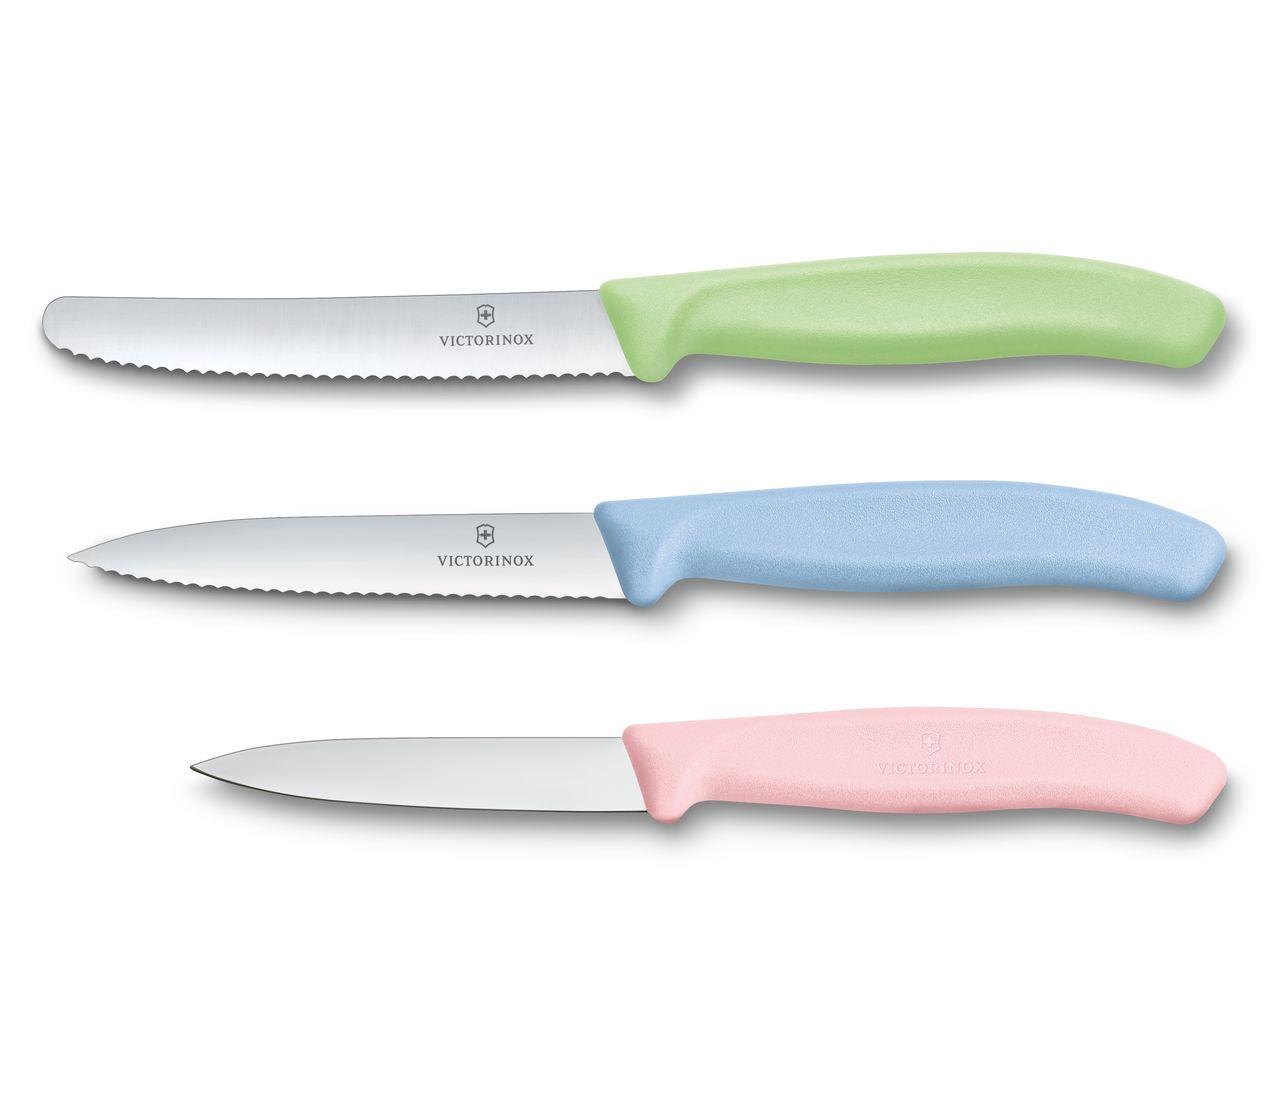 Victorinox Swiss Classic Trend Colors Paring Knife 3 Piece Set -  KnifeCenter - 6.7116.34L1 - Discontinued